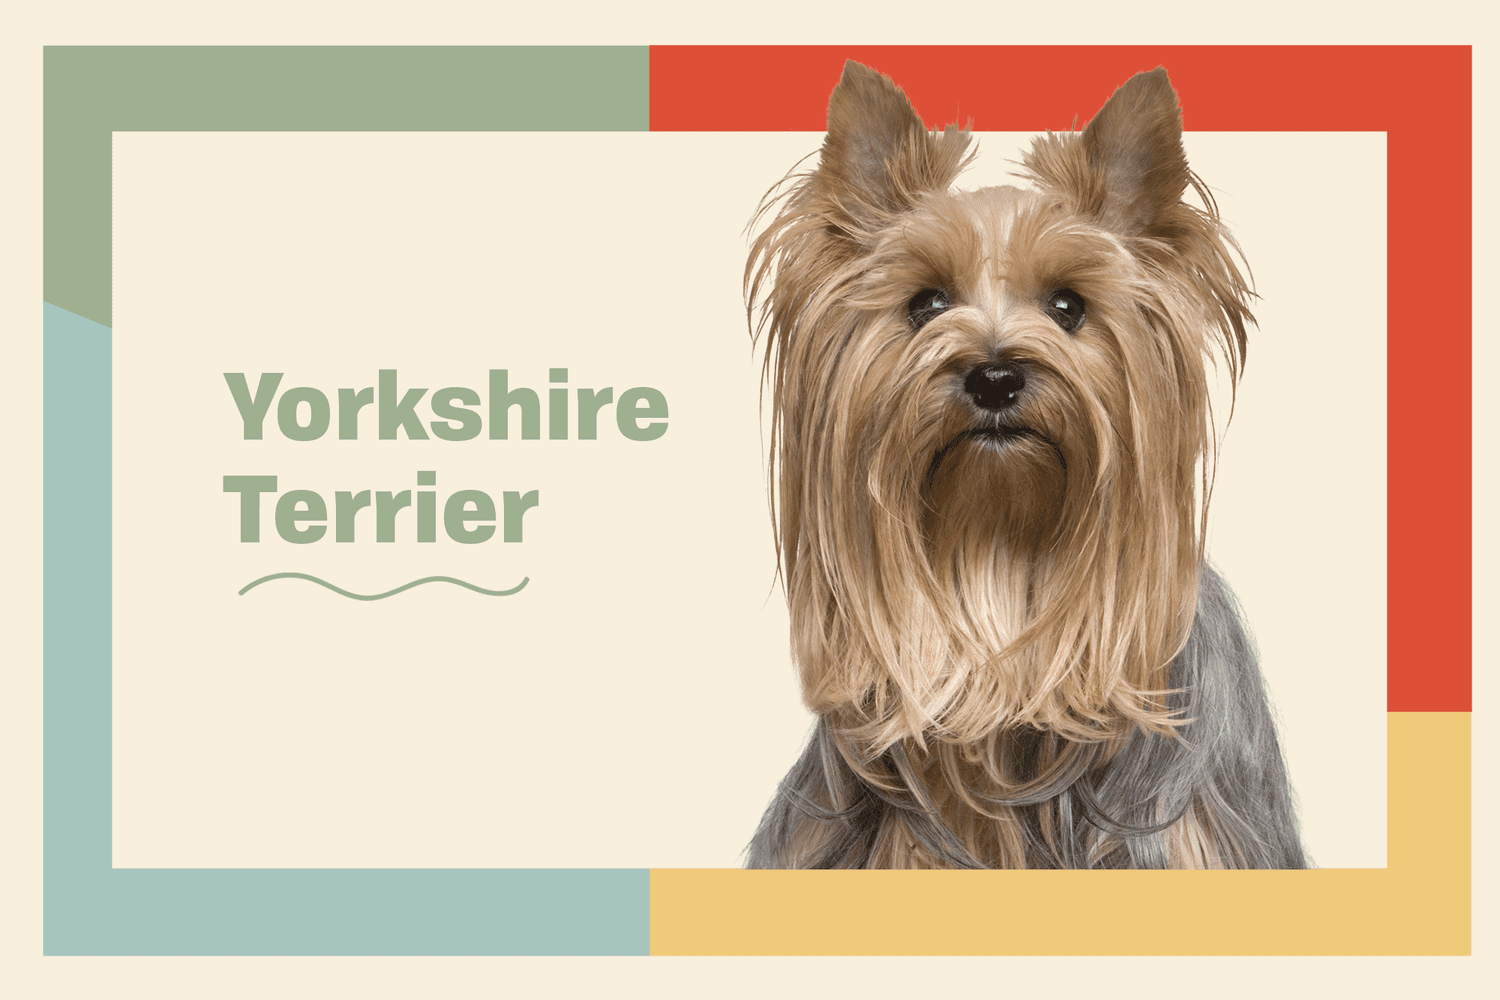 Yorkshire Terrier Yorkie Dog Breed Information Characteristics Daily Paws